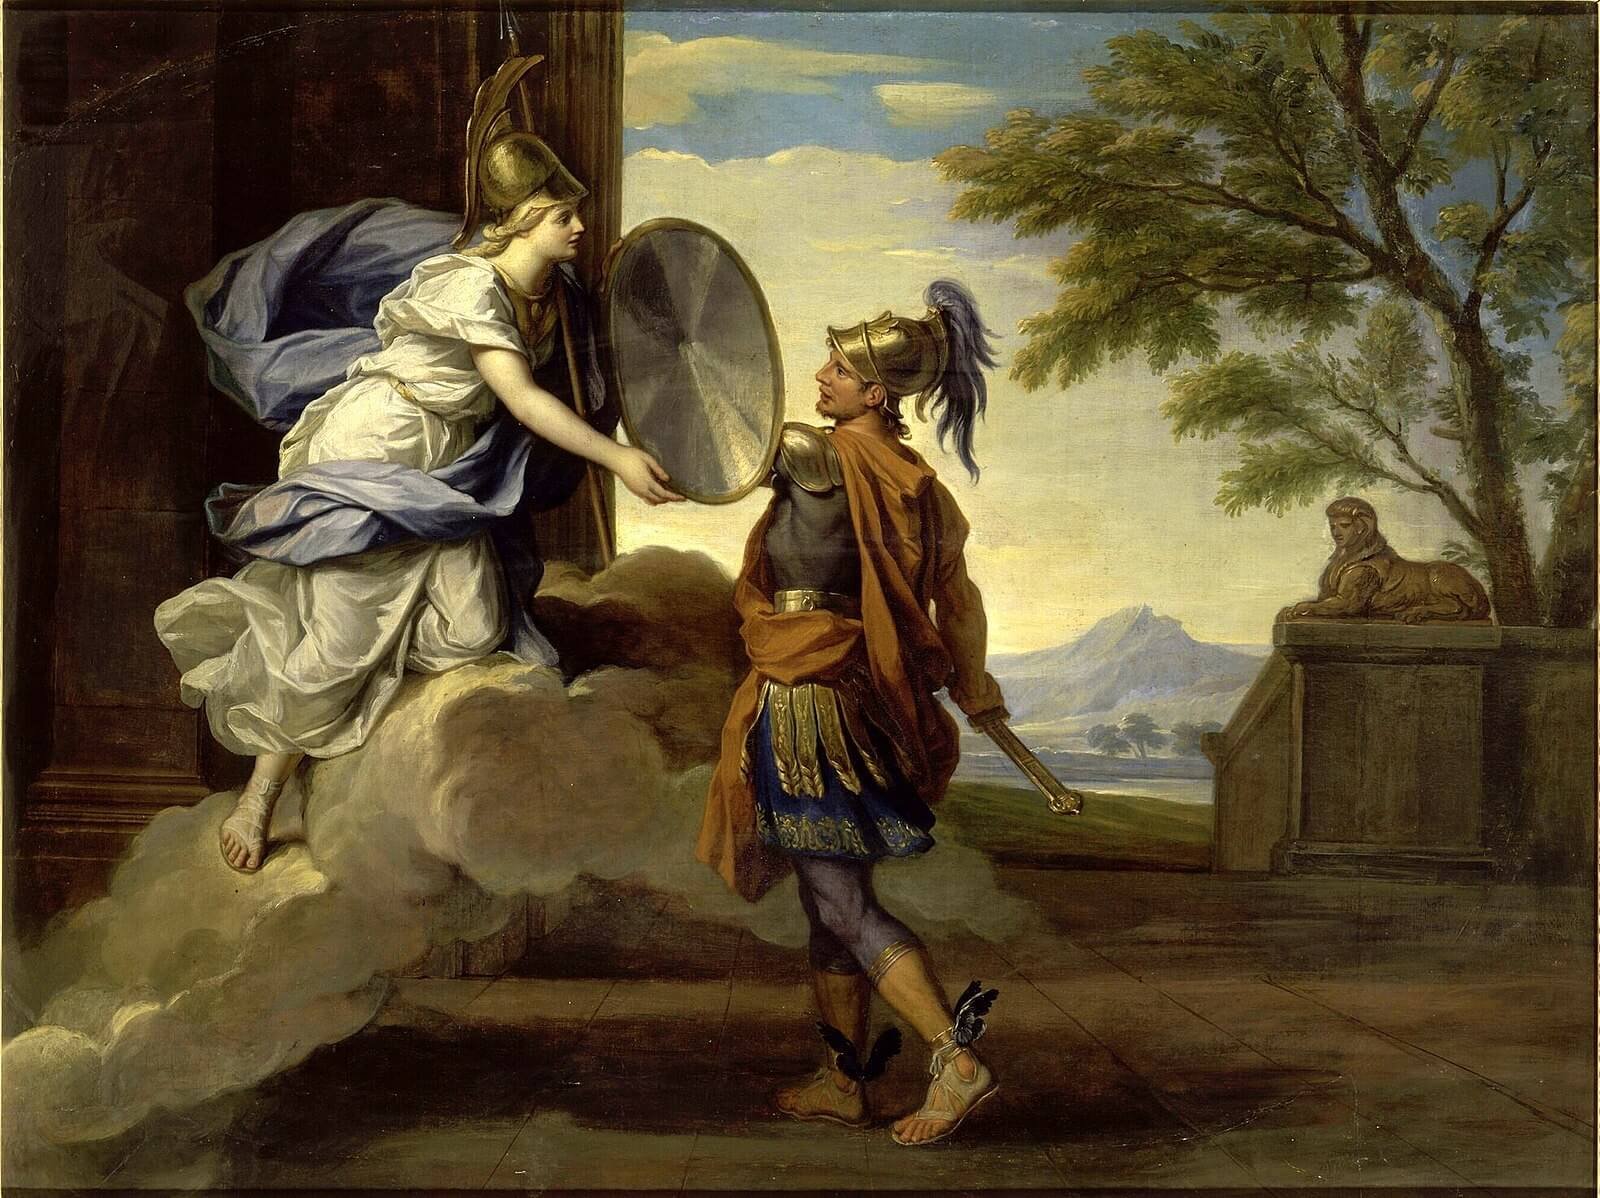 This painting represents young and beautiful Athena giving her shield to young and unbearded Perseus, dressed in blue-orange armour.